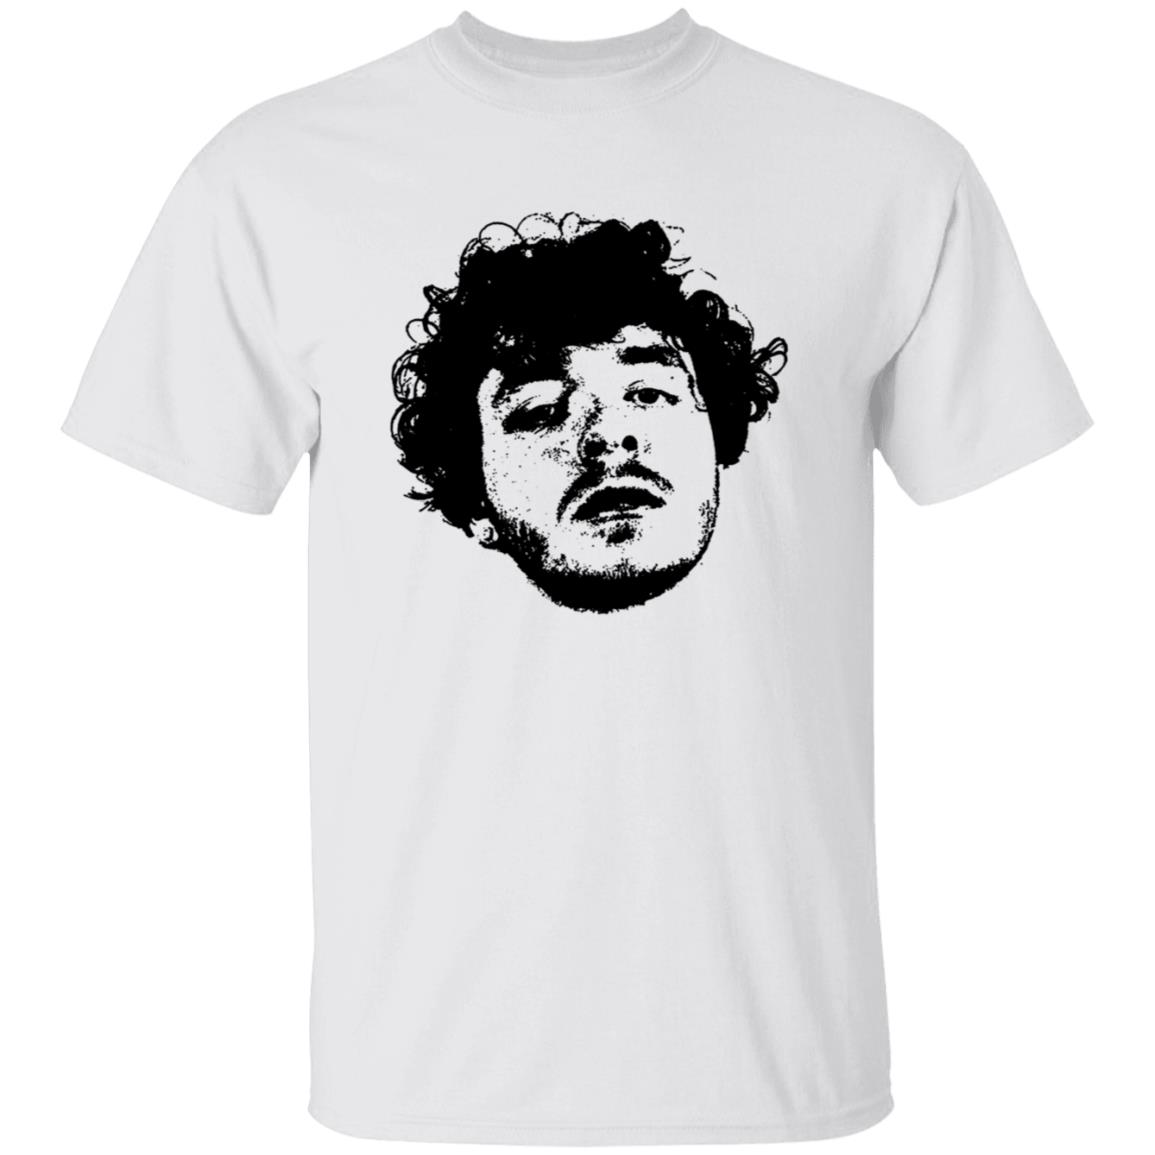 Show your love for Jack Harlow with official merchandise